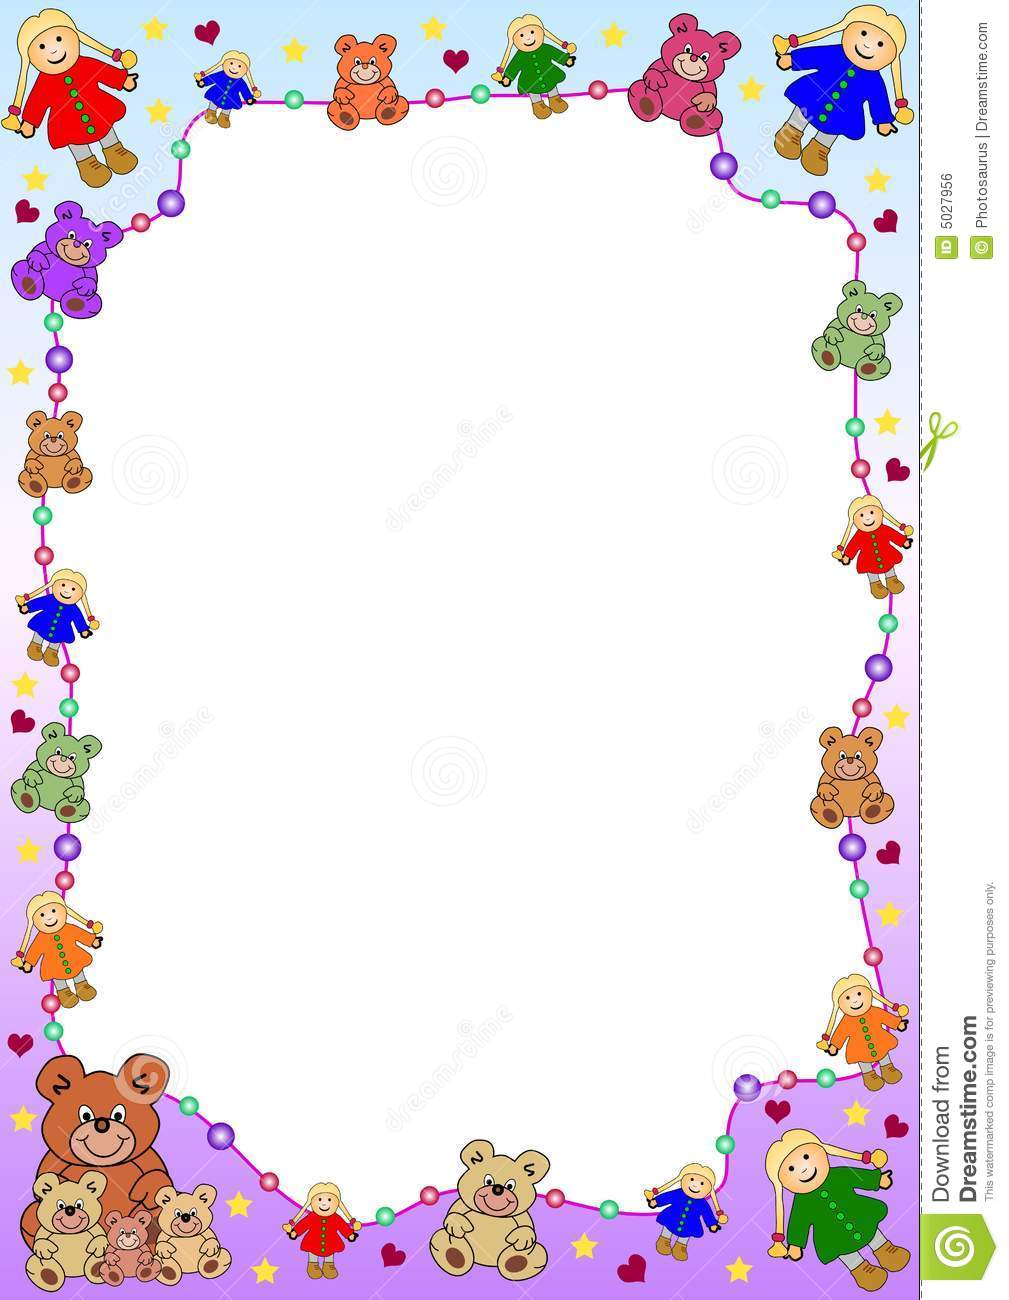 Puppets And Bears Border Royalty Free Stock Image   Image  5027956